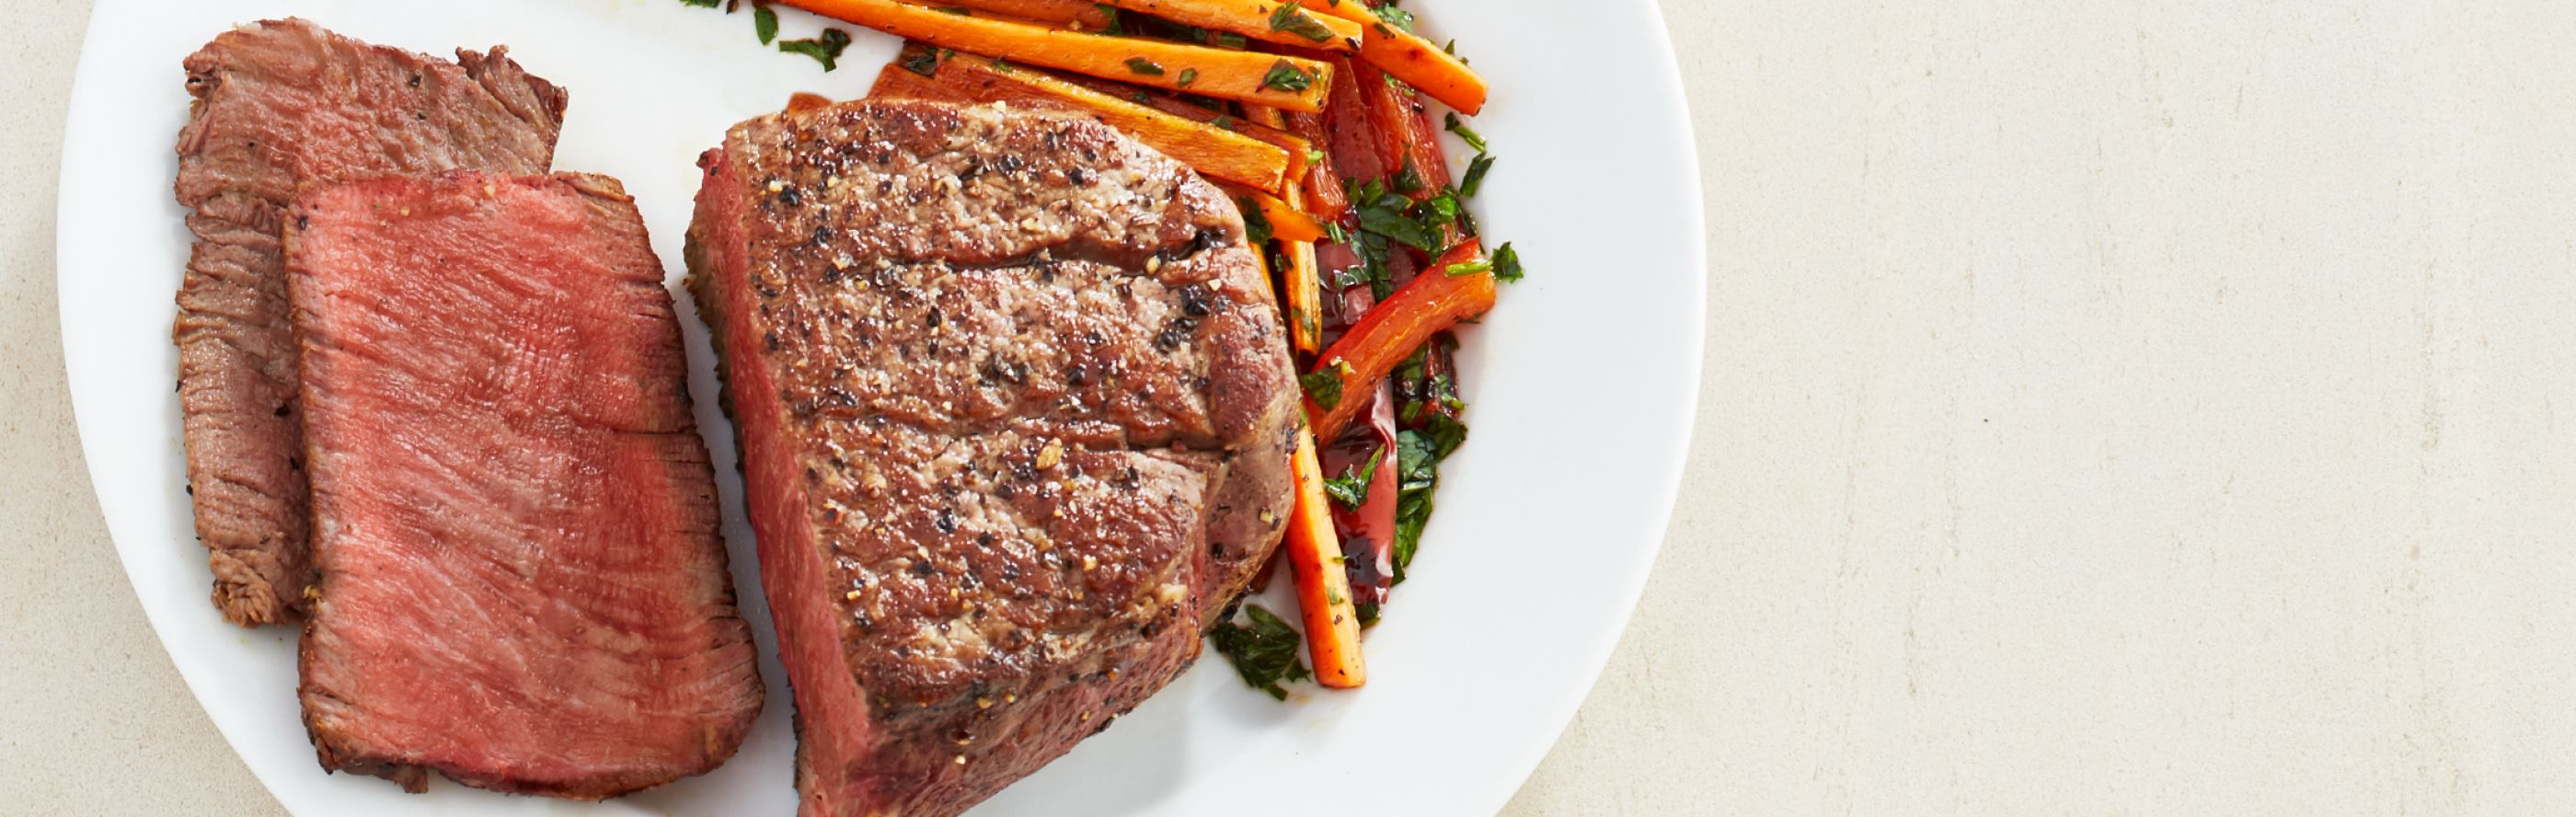 Steak on a plate with vegetables